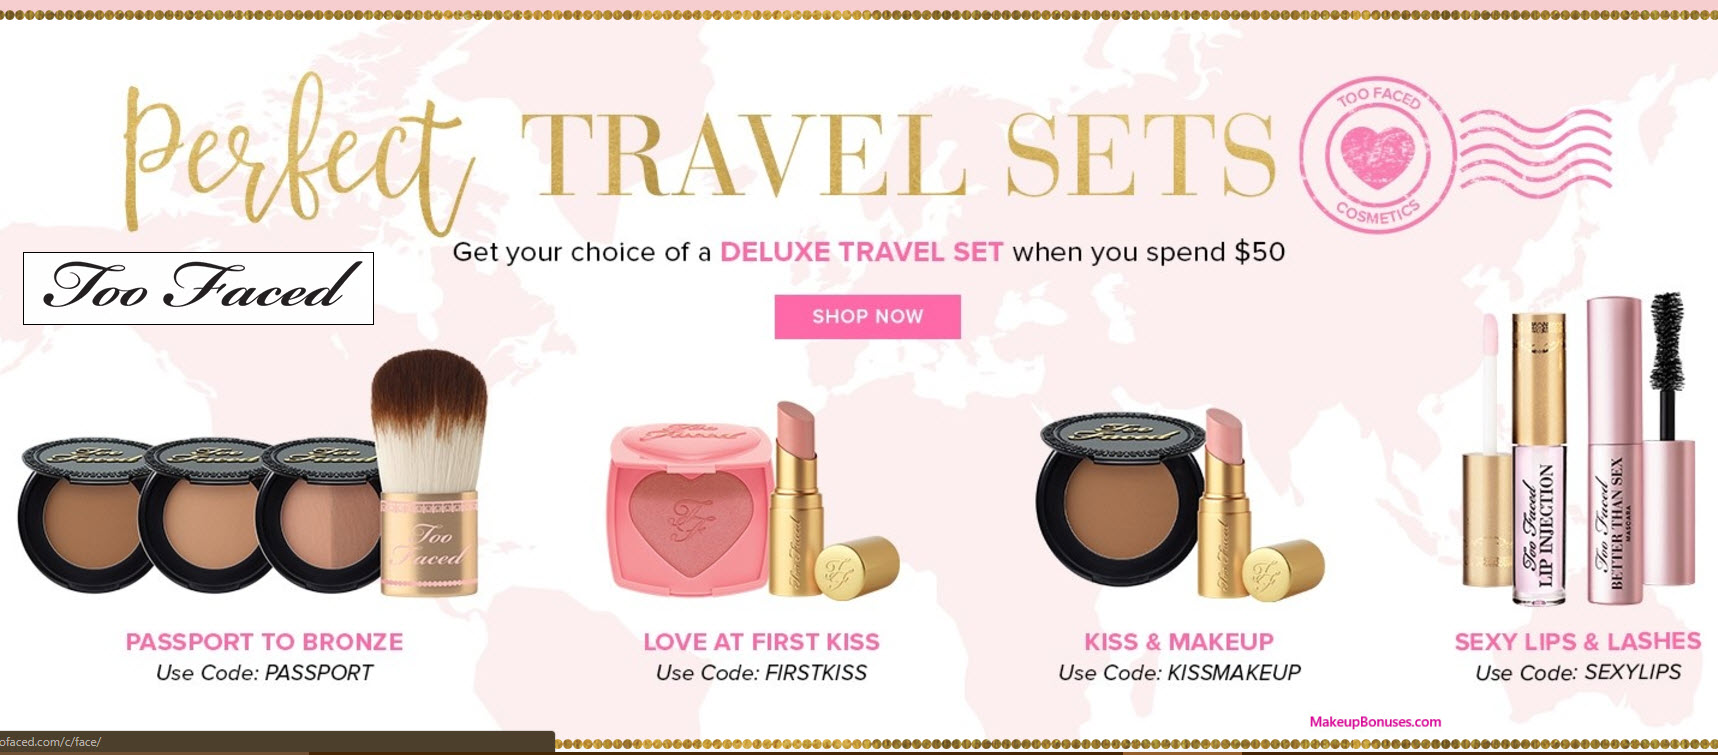 Receive your choice of 4-pc gift with your $50 Too Faced purchase